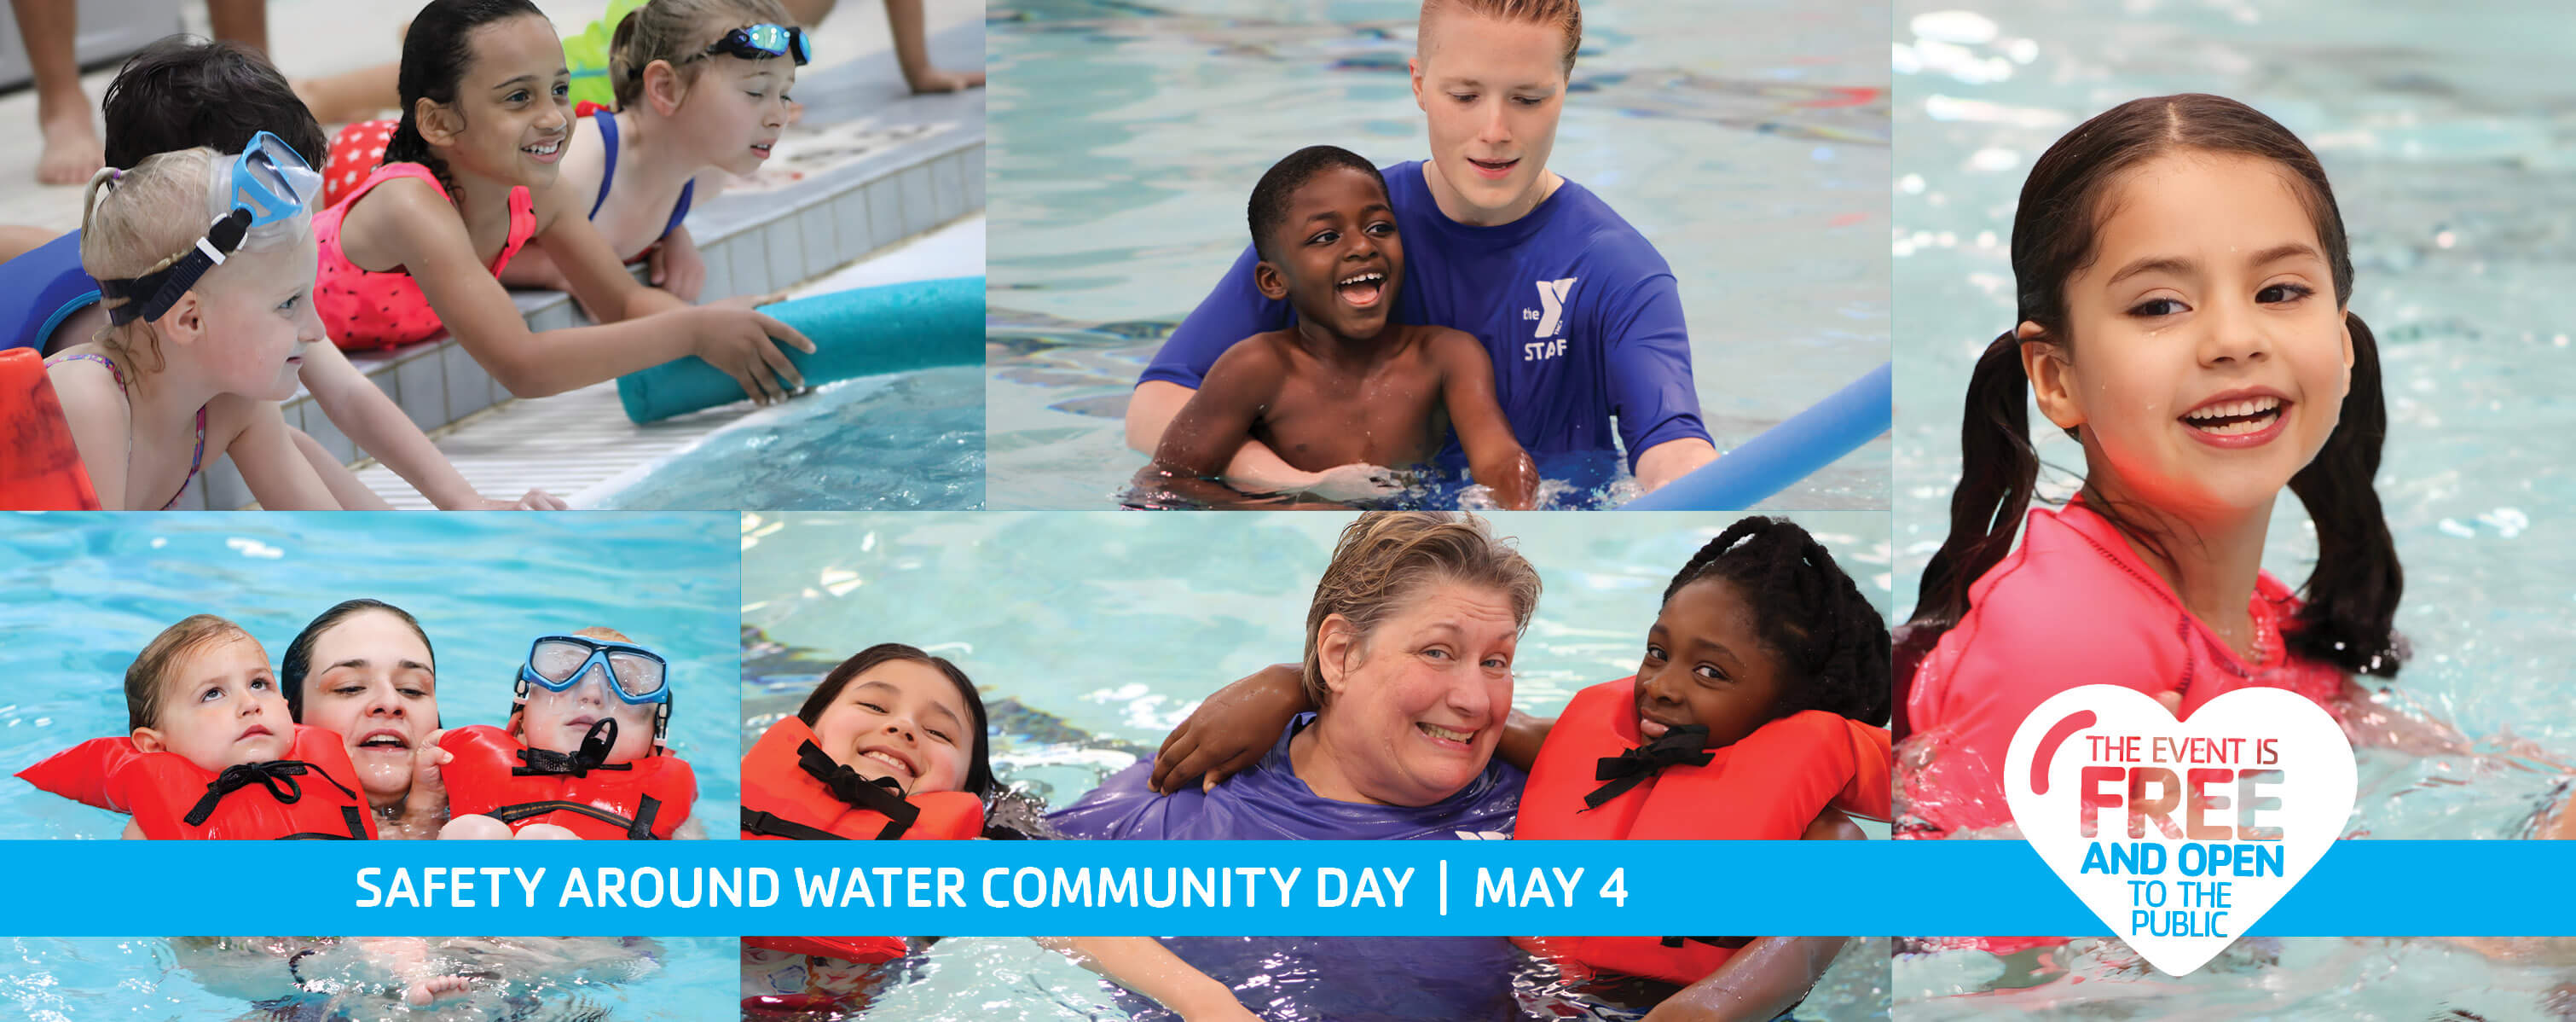 May 20 is Safety Around Water Community Day